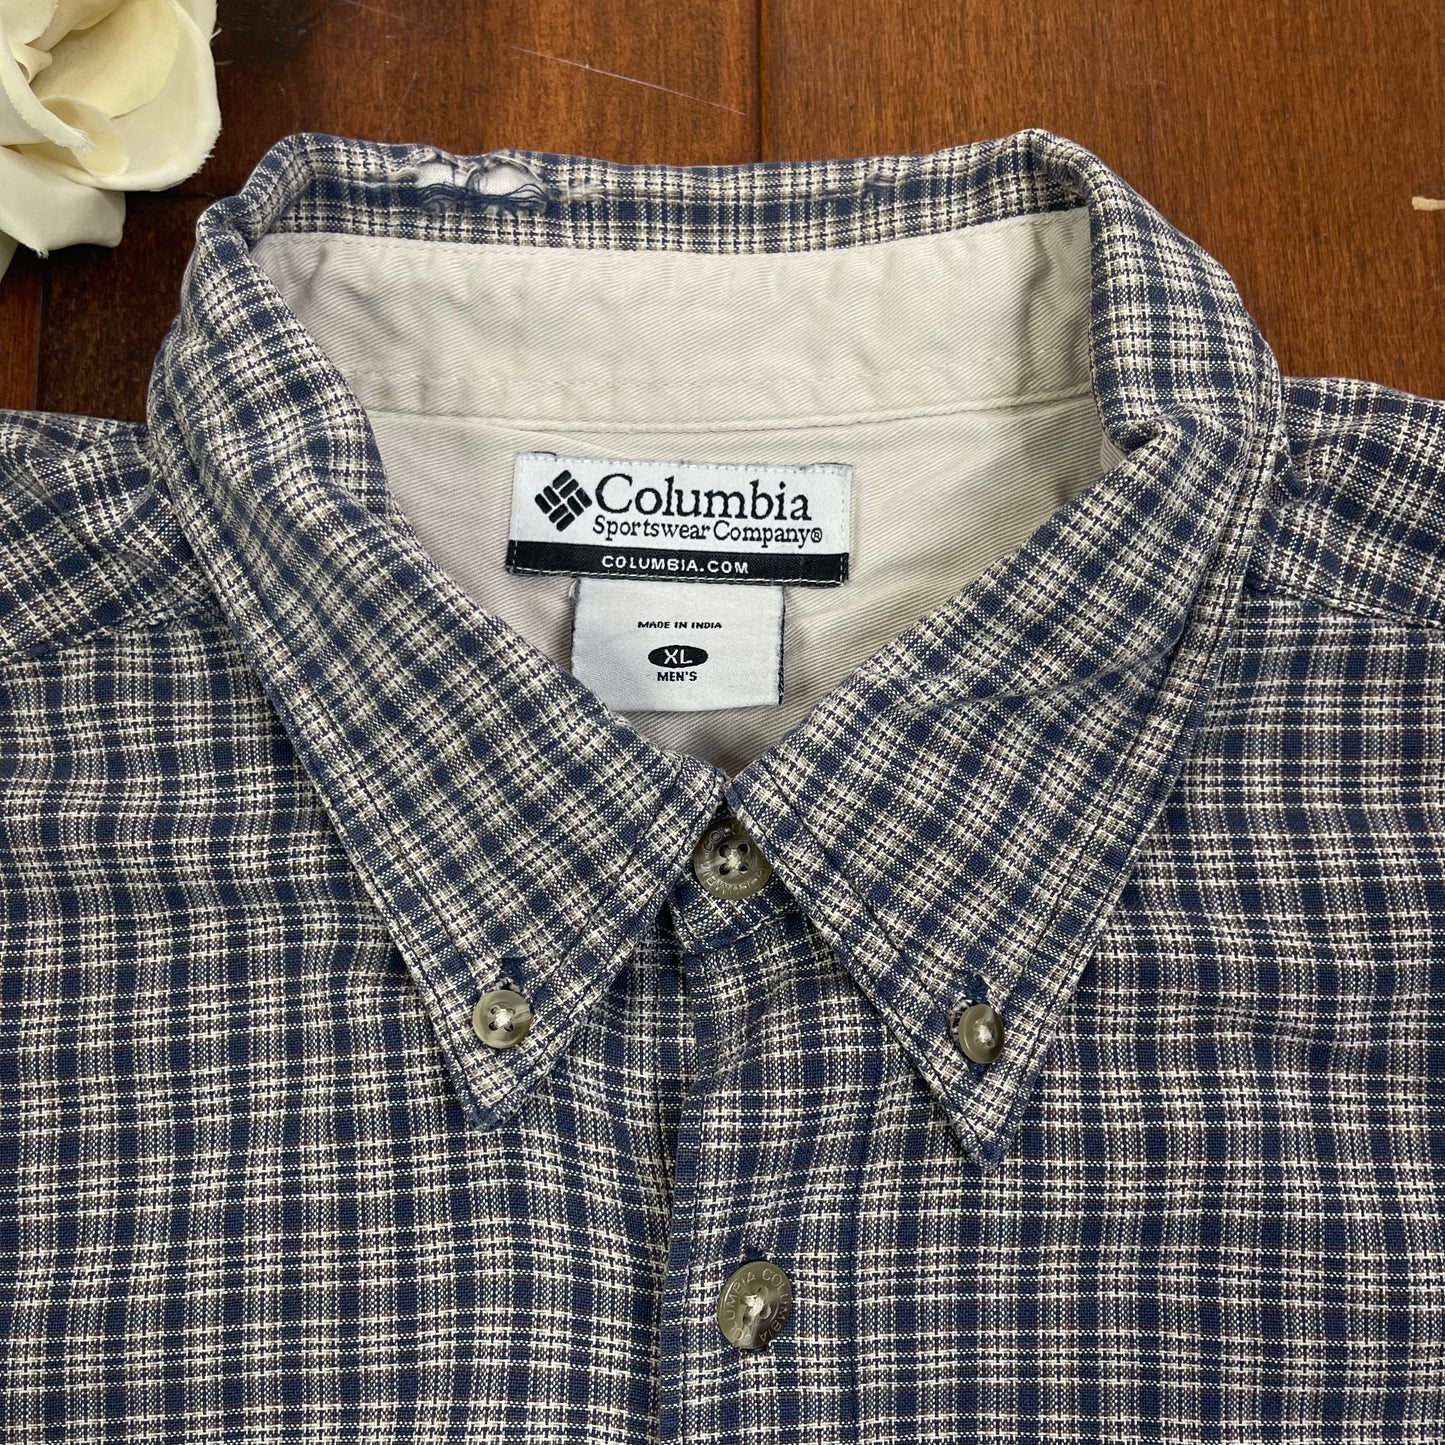 THRIFTED COLUMBIA BUTTON-UP